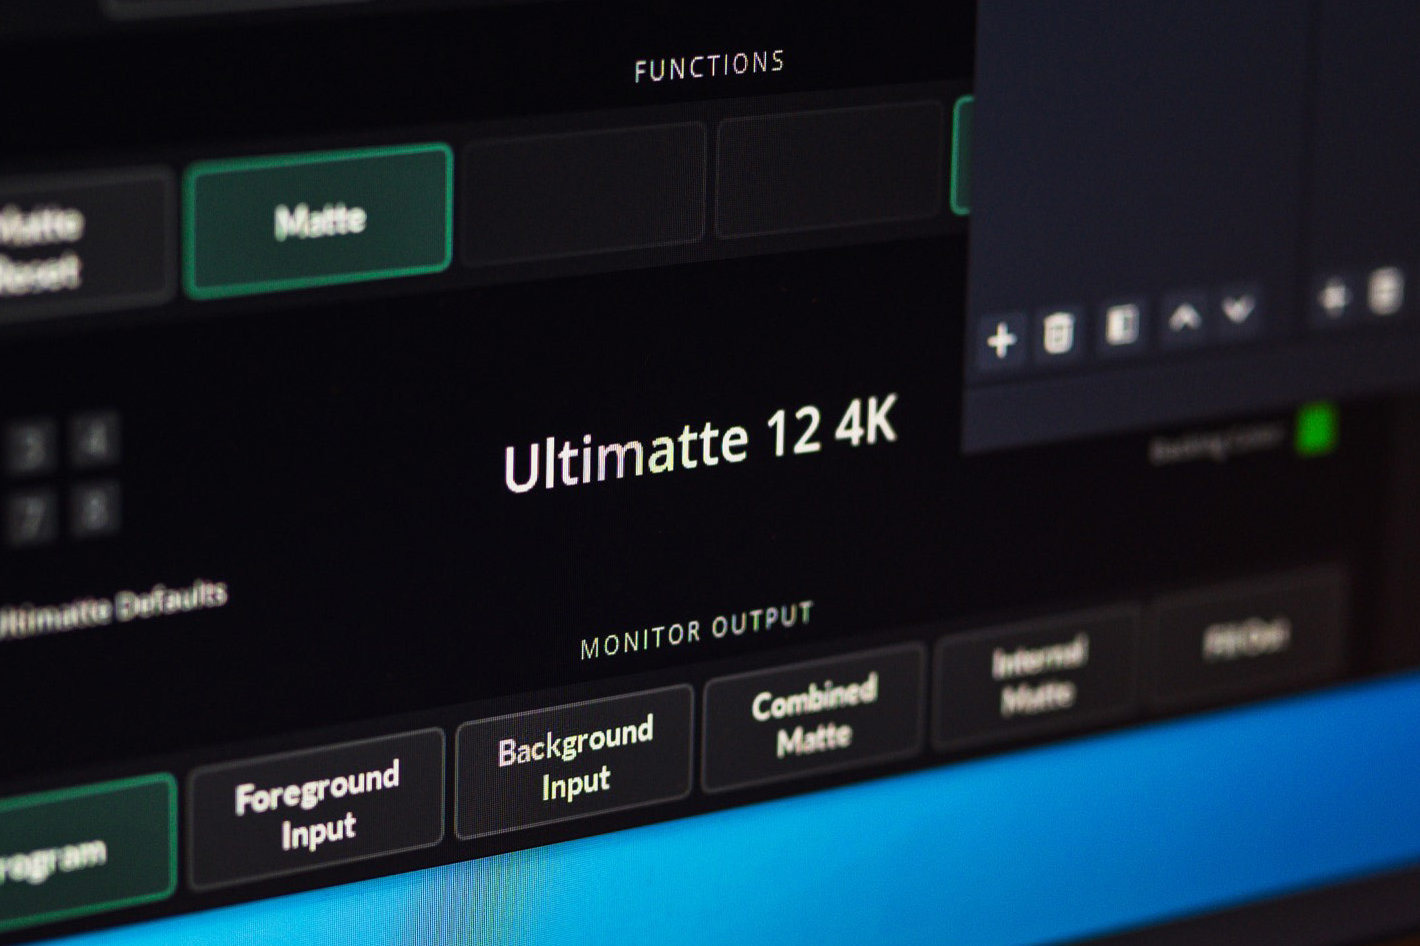 Ultimatte 12 4K saves hours per XR Virtual Production project